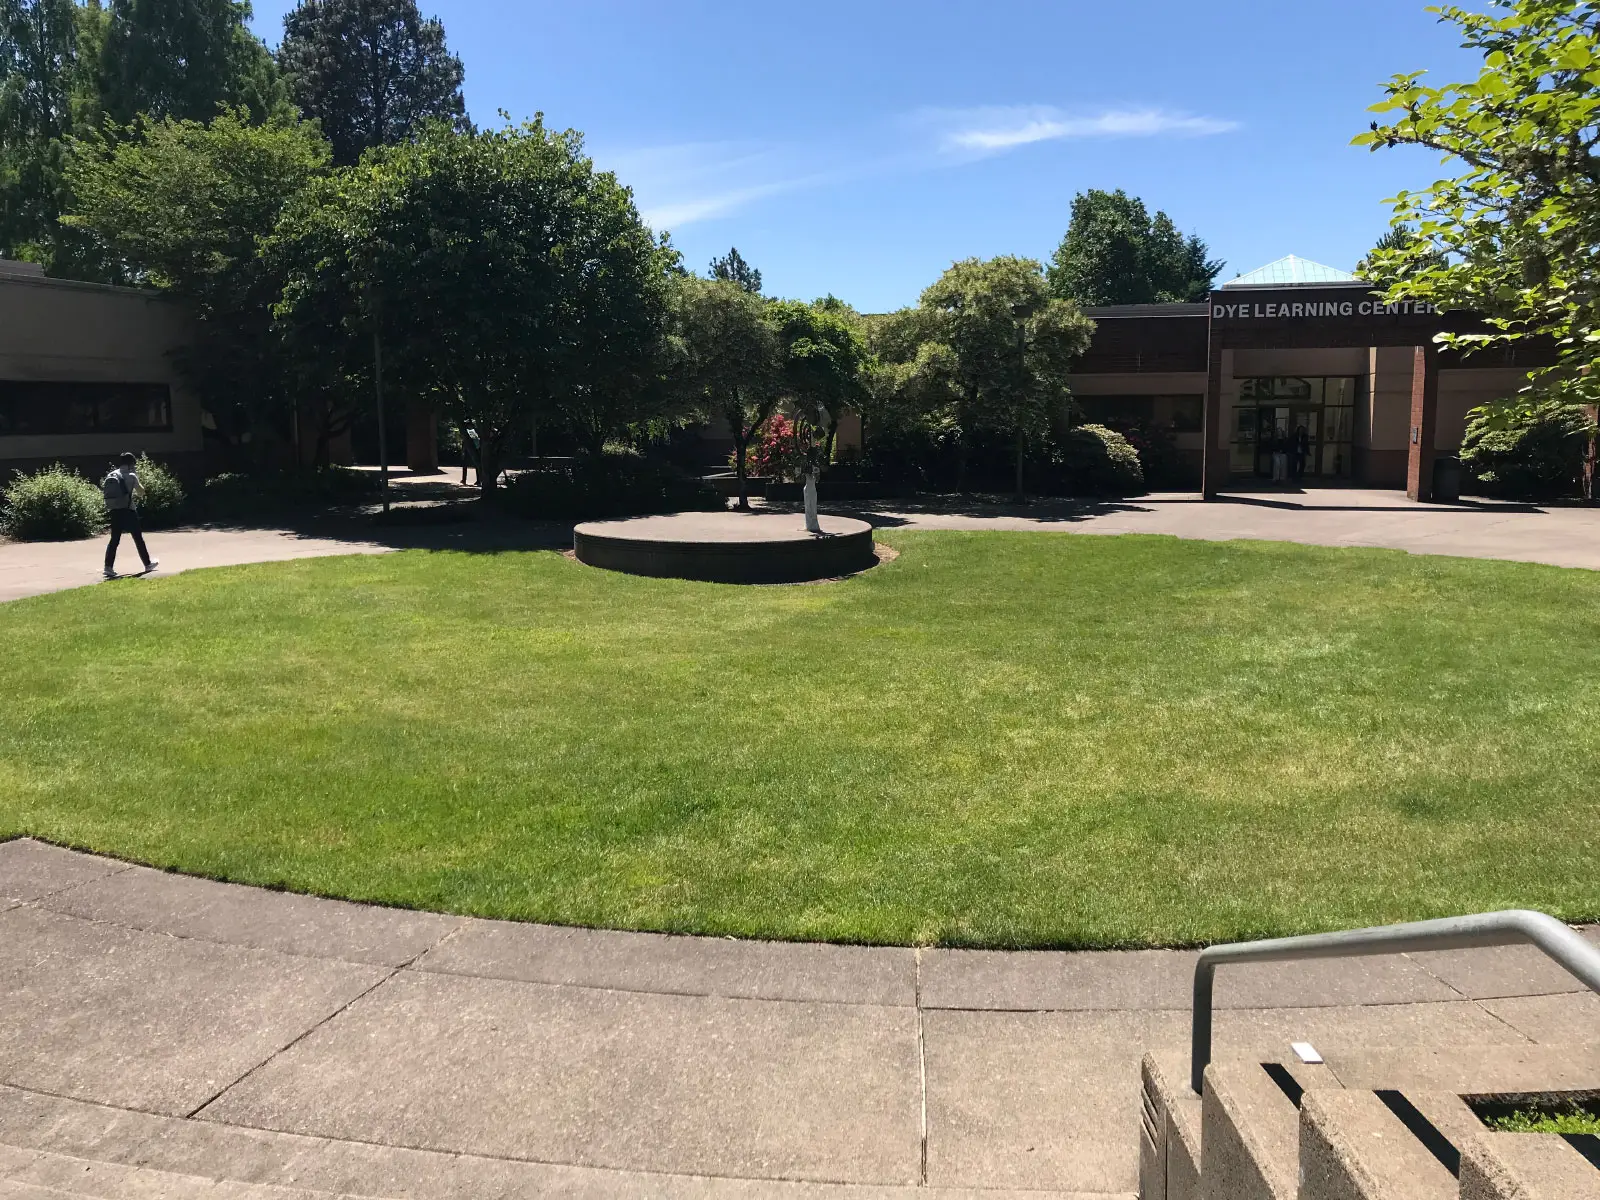 The grassy seating area outside the Dye Learning Center and Gregory Forum at the Oregon City campus